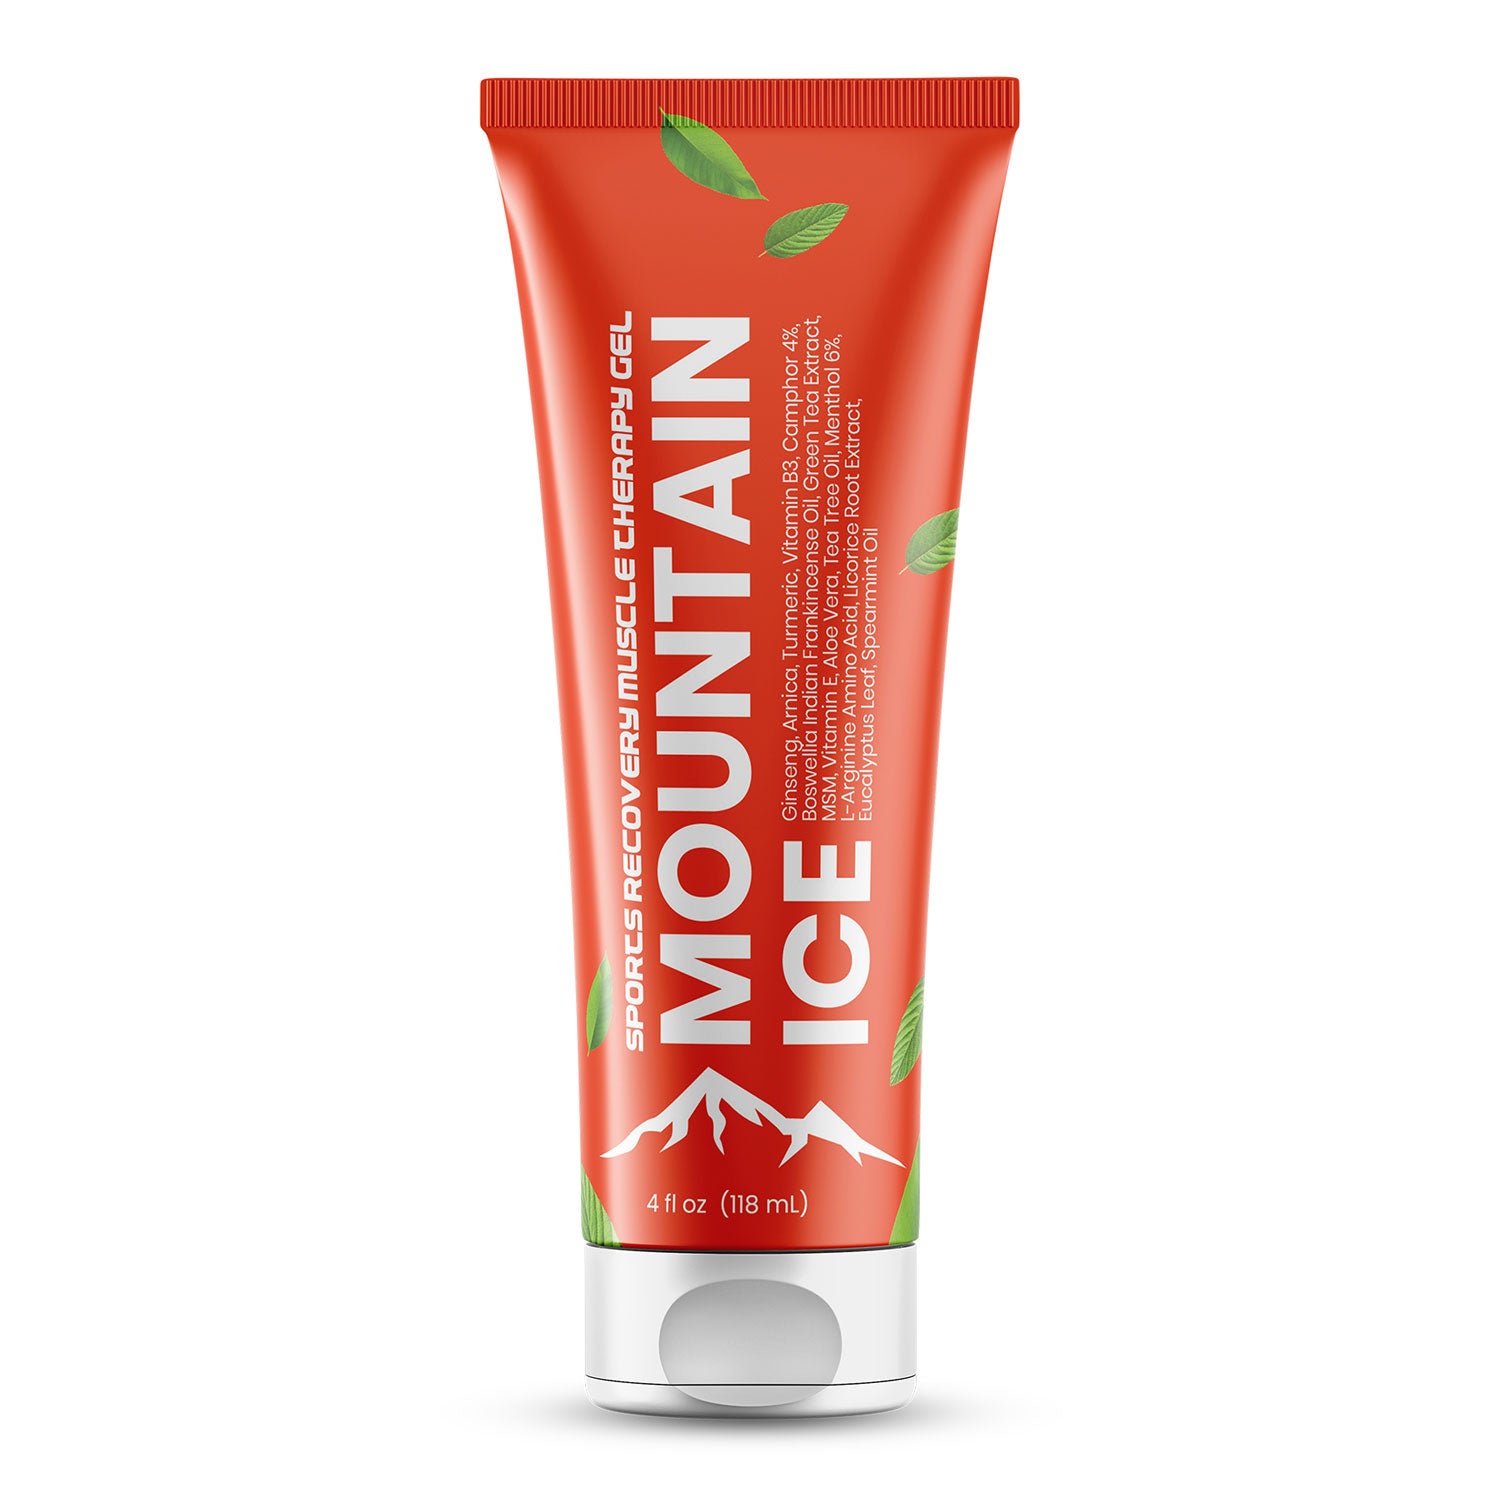 Mountain Ice Sports Recovery Muscle Pain Relief Gel with Natural  Ingredients 4 oz